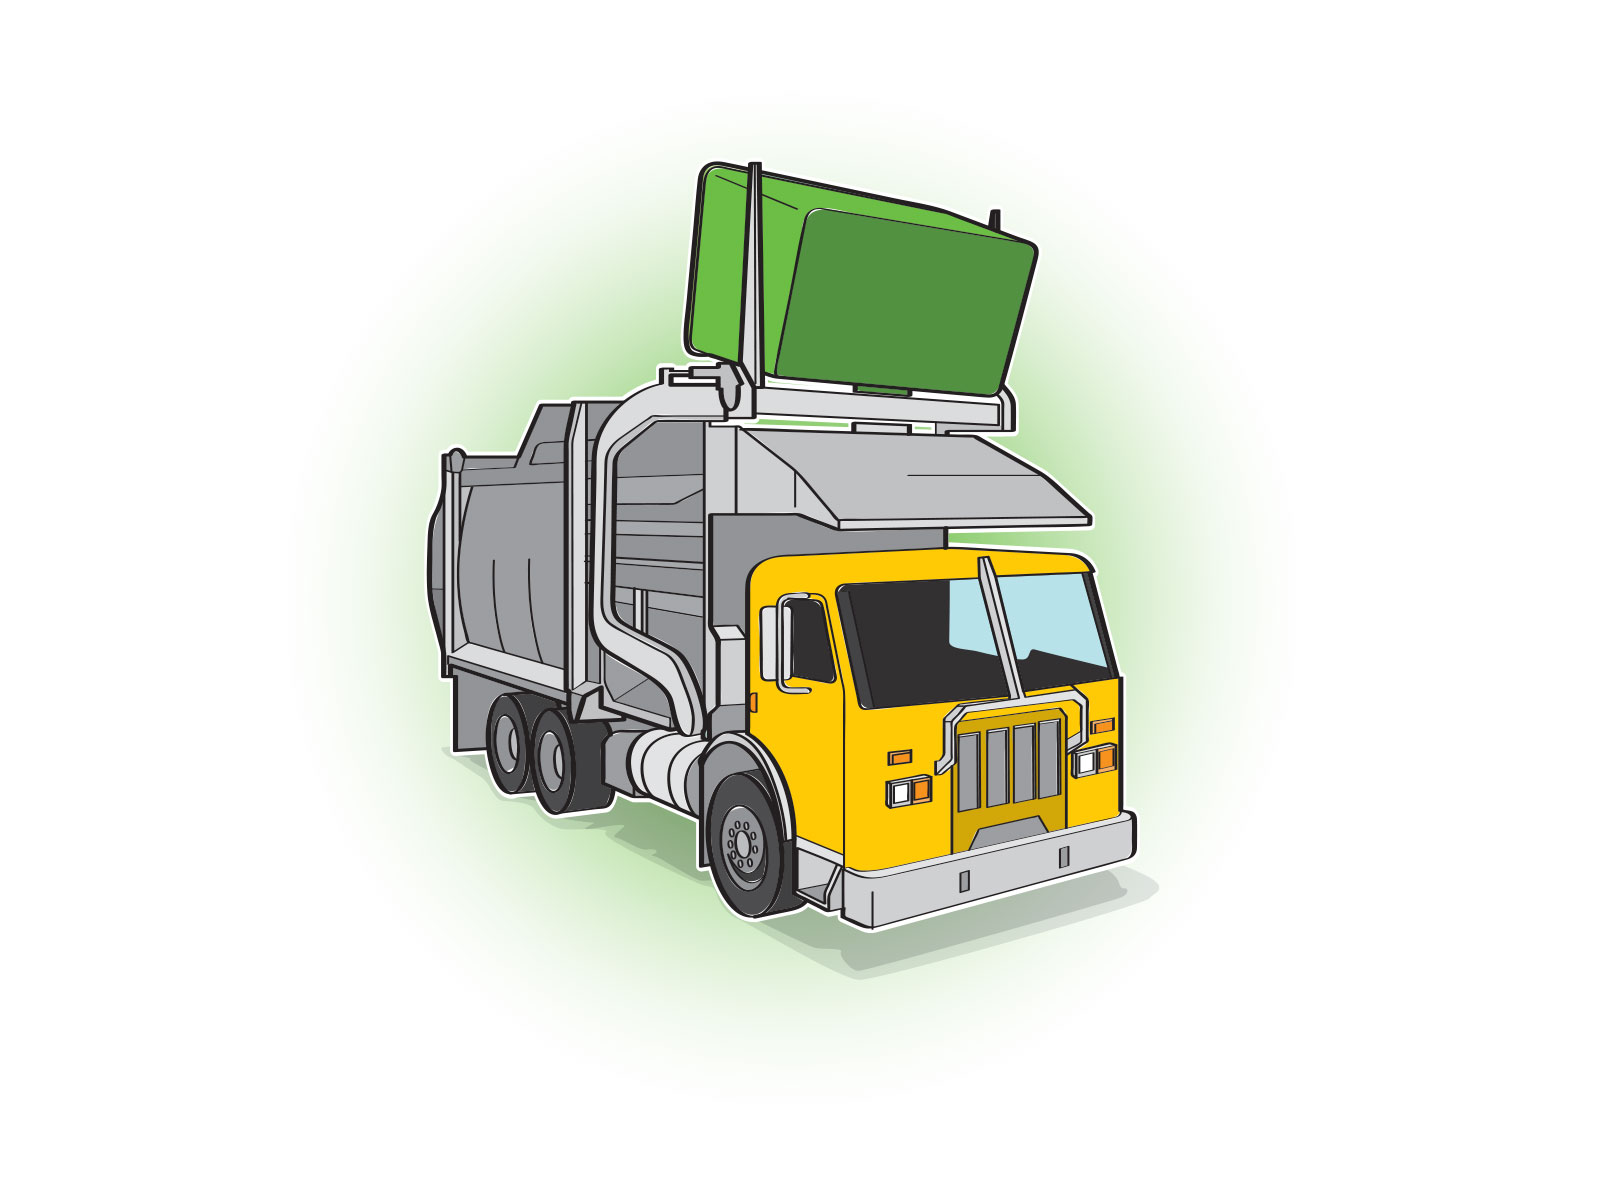 Stylised vector simplified illustration of rubbish truck emptying large skip